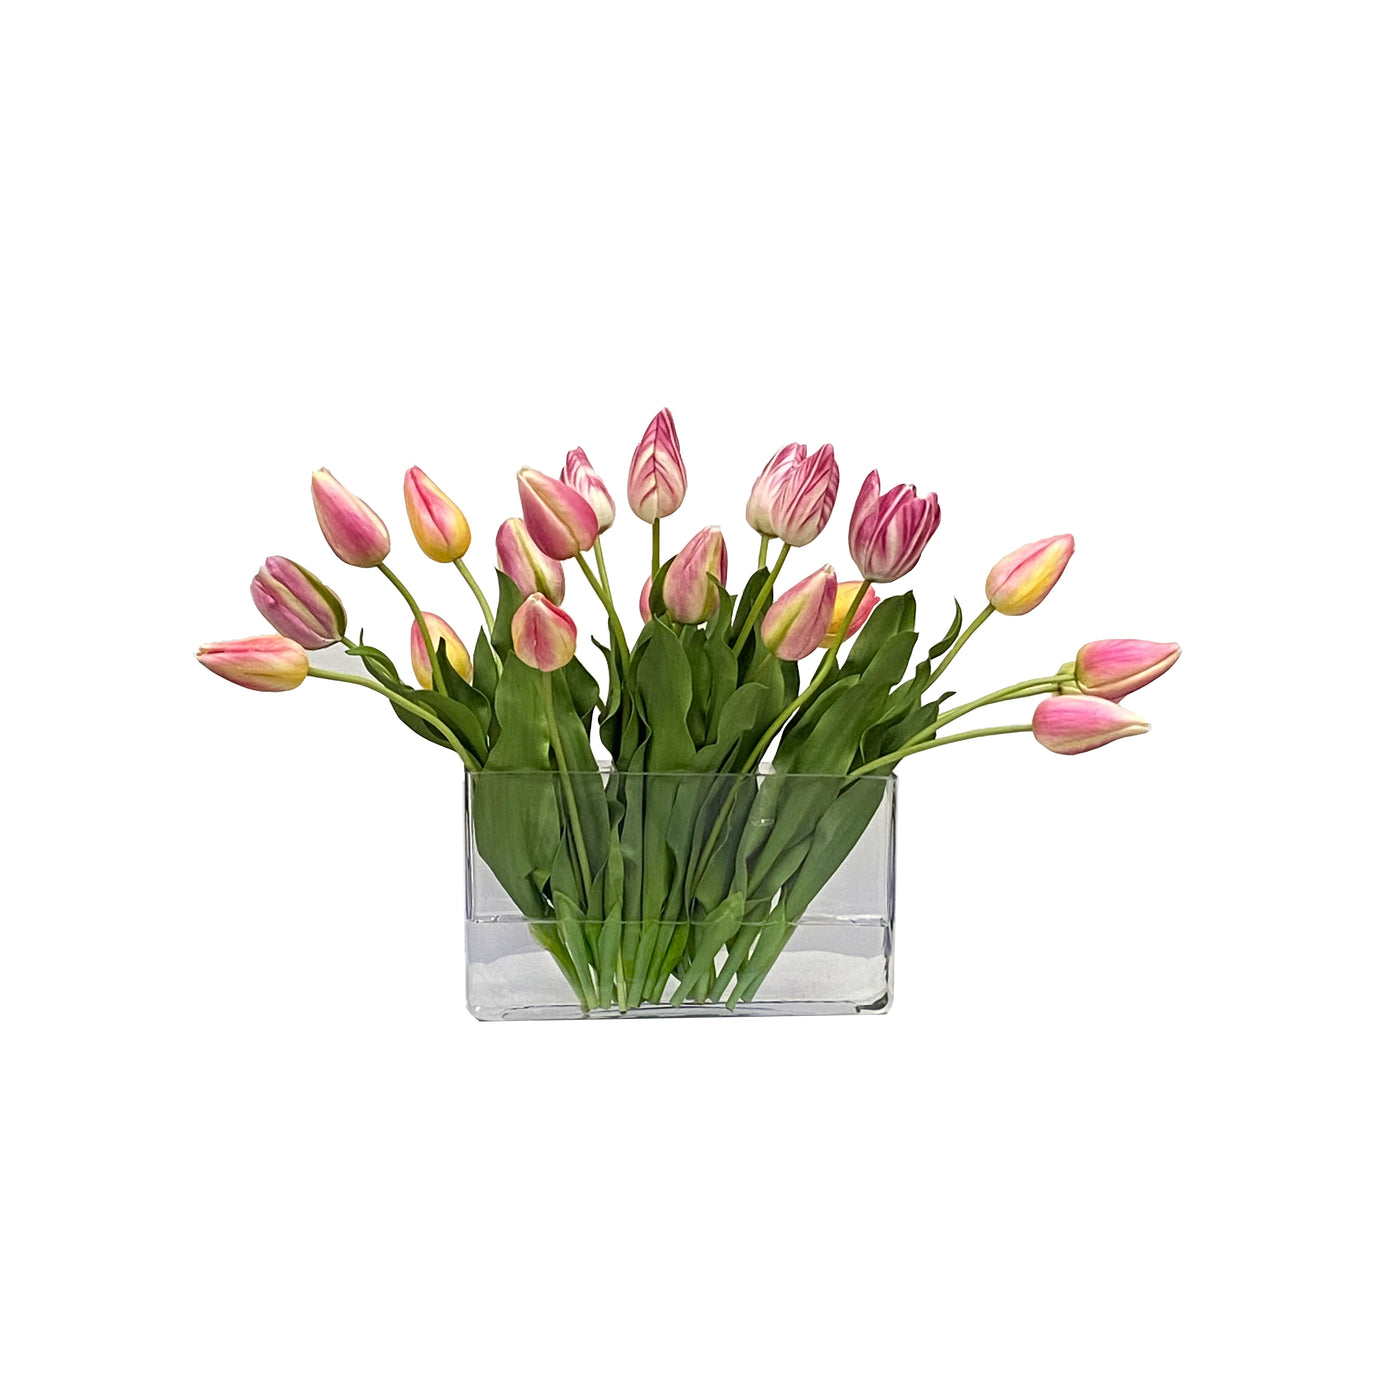 Mixed Spring time Tulips in a Vase 25 inches